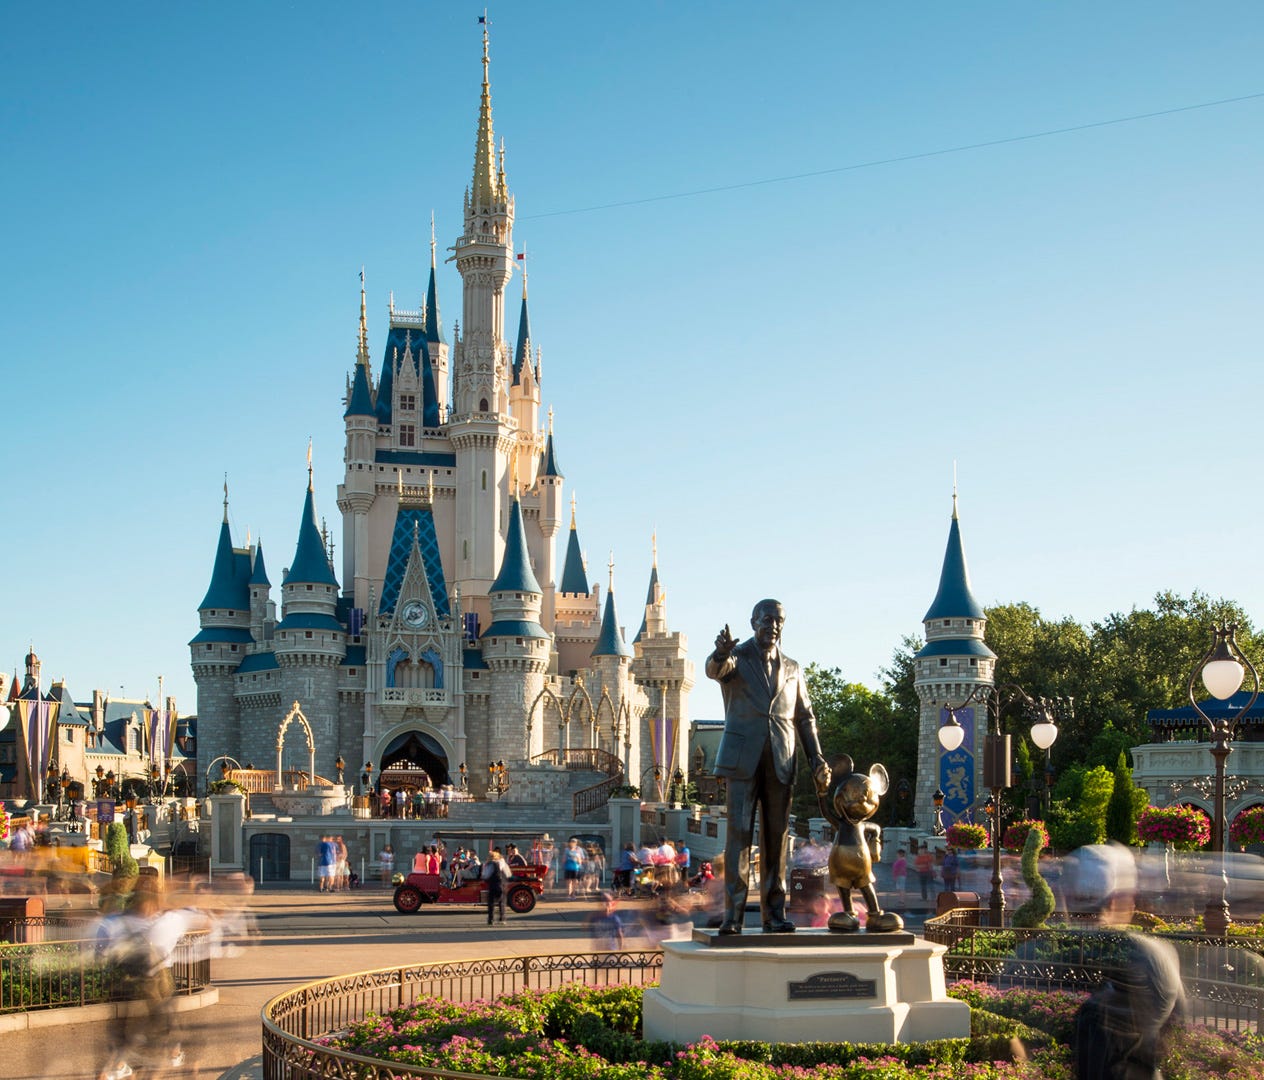 Disney World — Orlando, Fla. (Cost to fly: $124): The most popular theme park in the world, according to Themed Entertainment Association, Magic Kingdom gets over 20 million visitors a year, making it one of the biggest tourist attractions on the pla